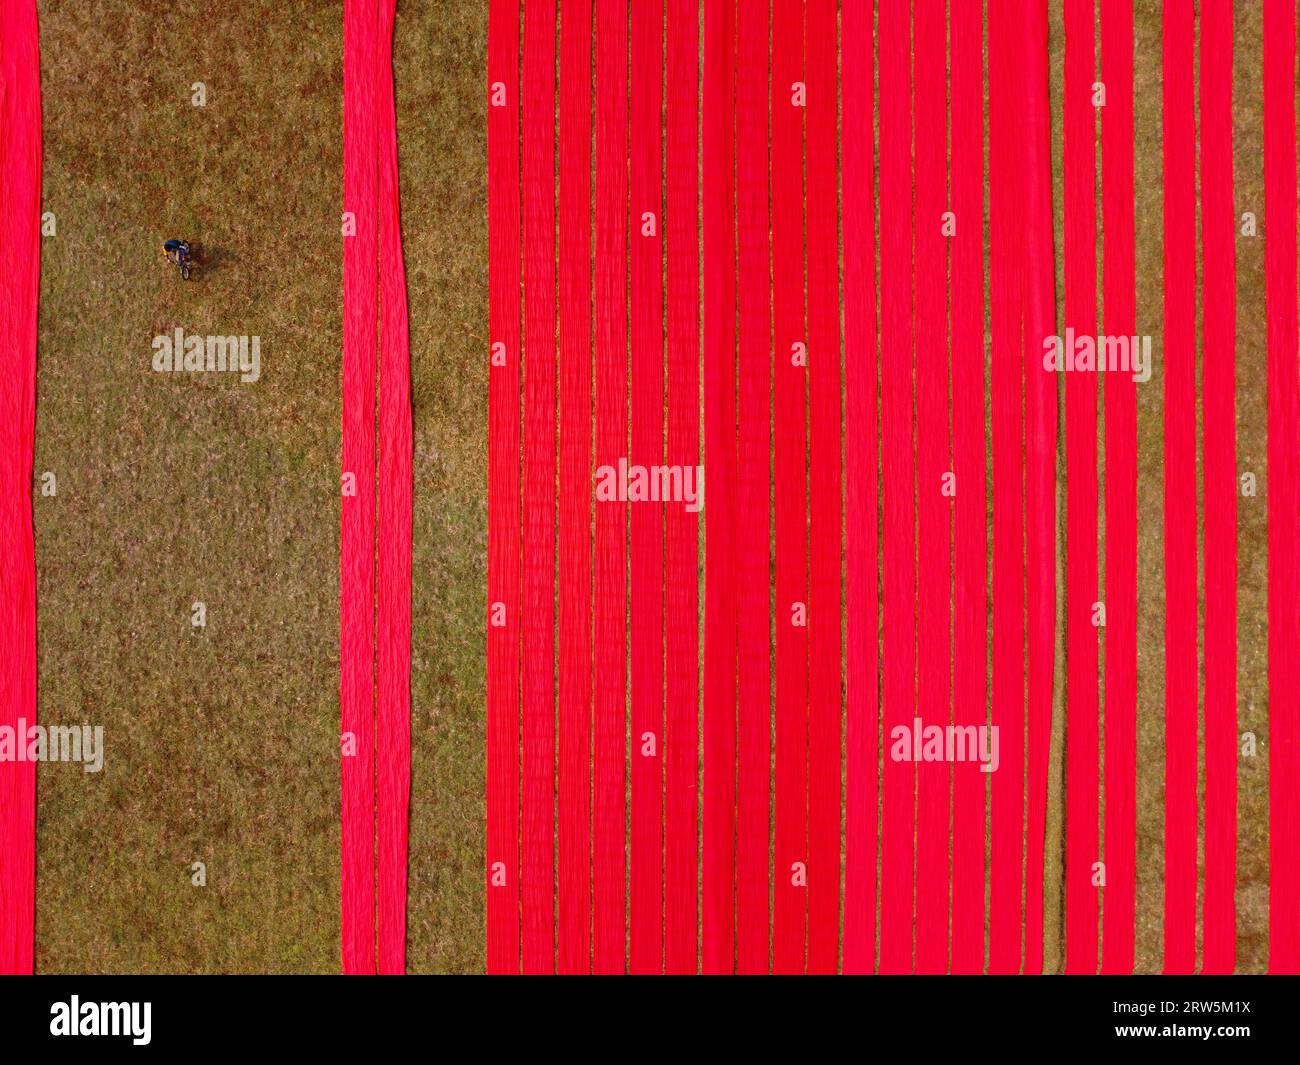 Narsingdi, Bangladesh. 17th Sep, 2023. Hundreds of meters of bright red fabrics are laid out in neat rows across a field in Narsingdi, Bangladesh. Known as 'Lal Shalu' to the locals, the long red cloths are set out to dry under the hot sun, having been dyed with bright red color. The use of sunlight to dry out the fabrics reduces production costs as it is cheaper and more sustainable. The eco-friendly drying method spans an area equal to 5 football fields and takes up to 6 hours to complete after being placed by workers at sunrise. Credit: Joy Saha/Alamy Live News Stock Photo